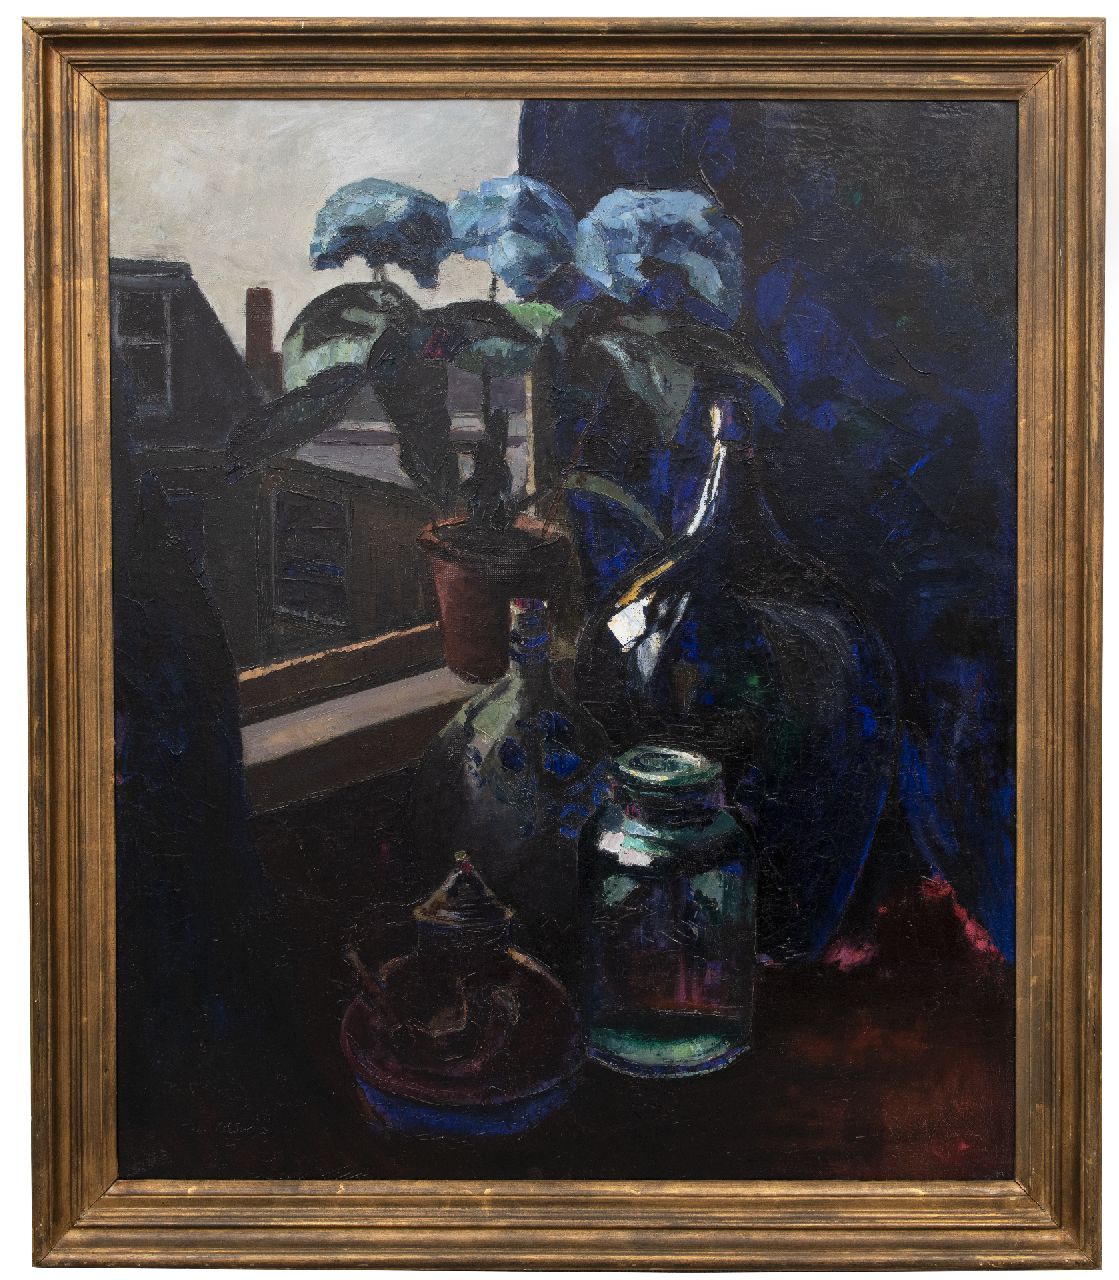 Kelder A.B.  | Antonius Bernardus 'Toon' Kelder | Paintings offered for sale | Still life with hydrangea by a window, oil on canvas 110.5 x 90.6 cm, signed l.l. and dated '25